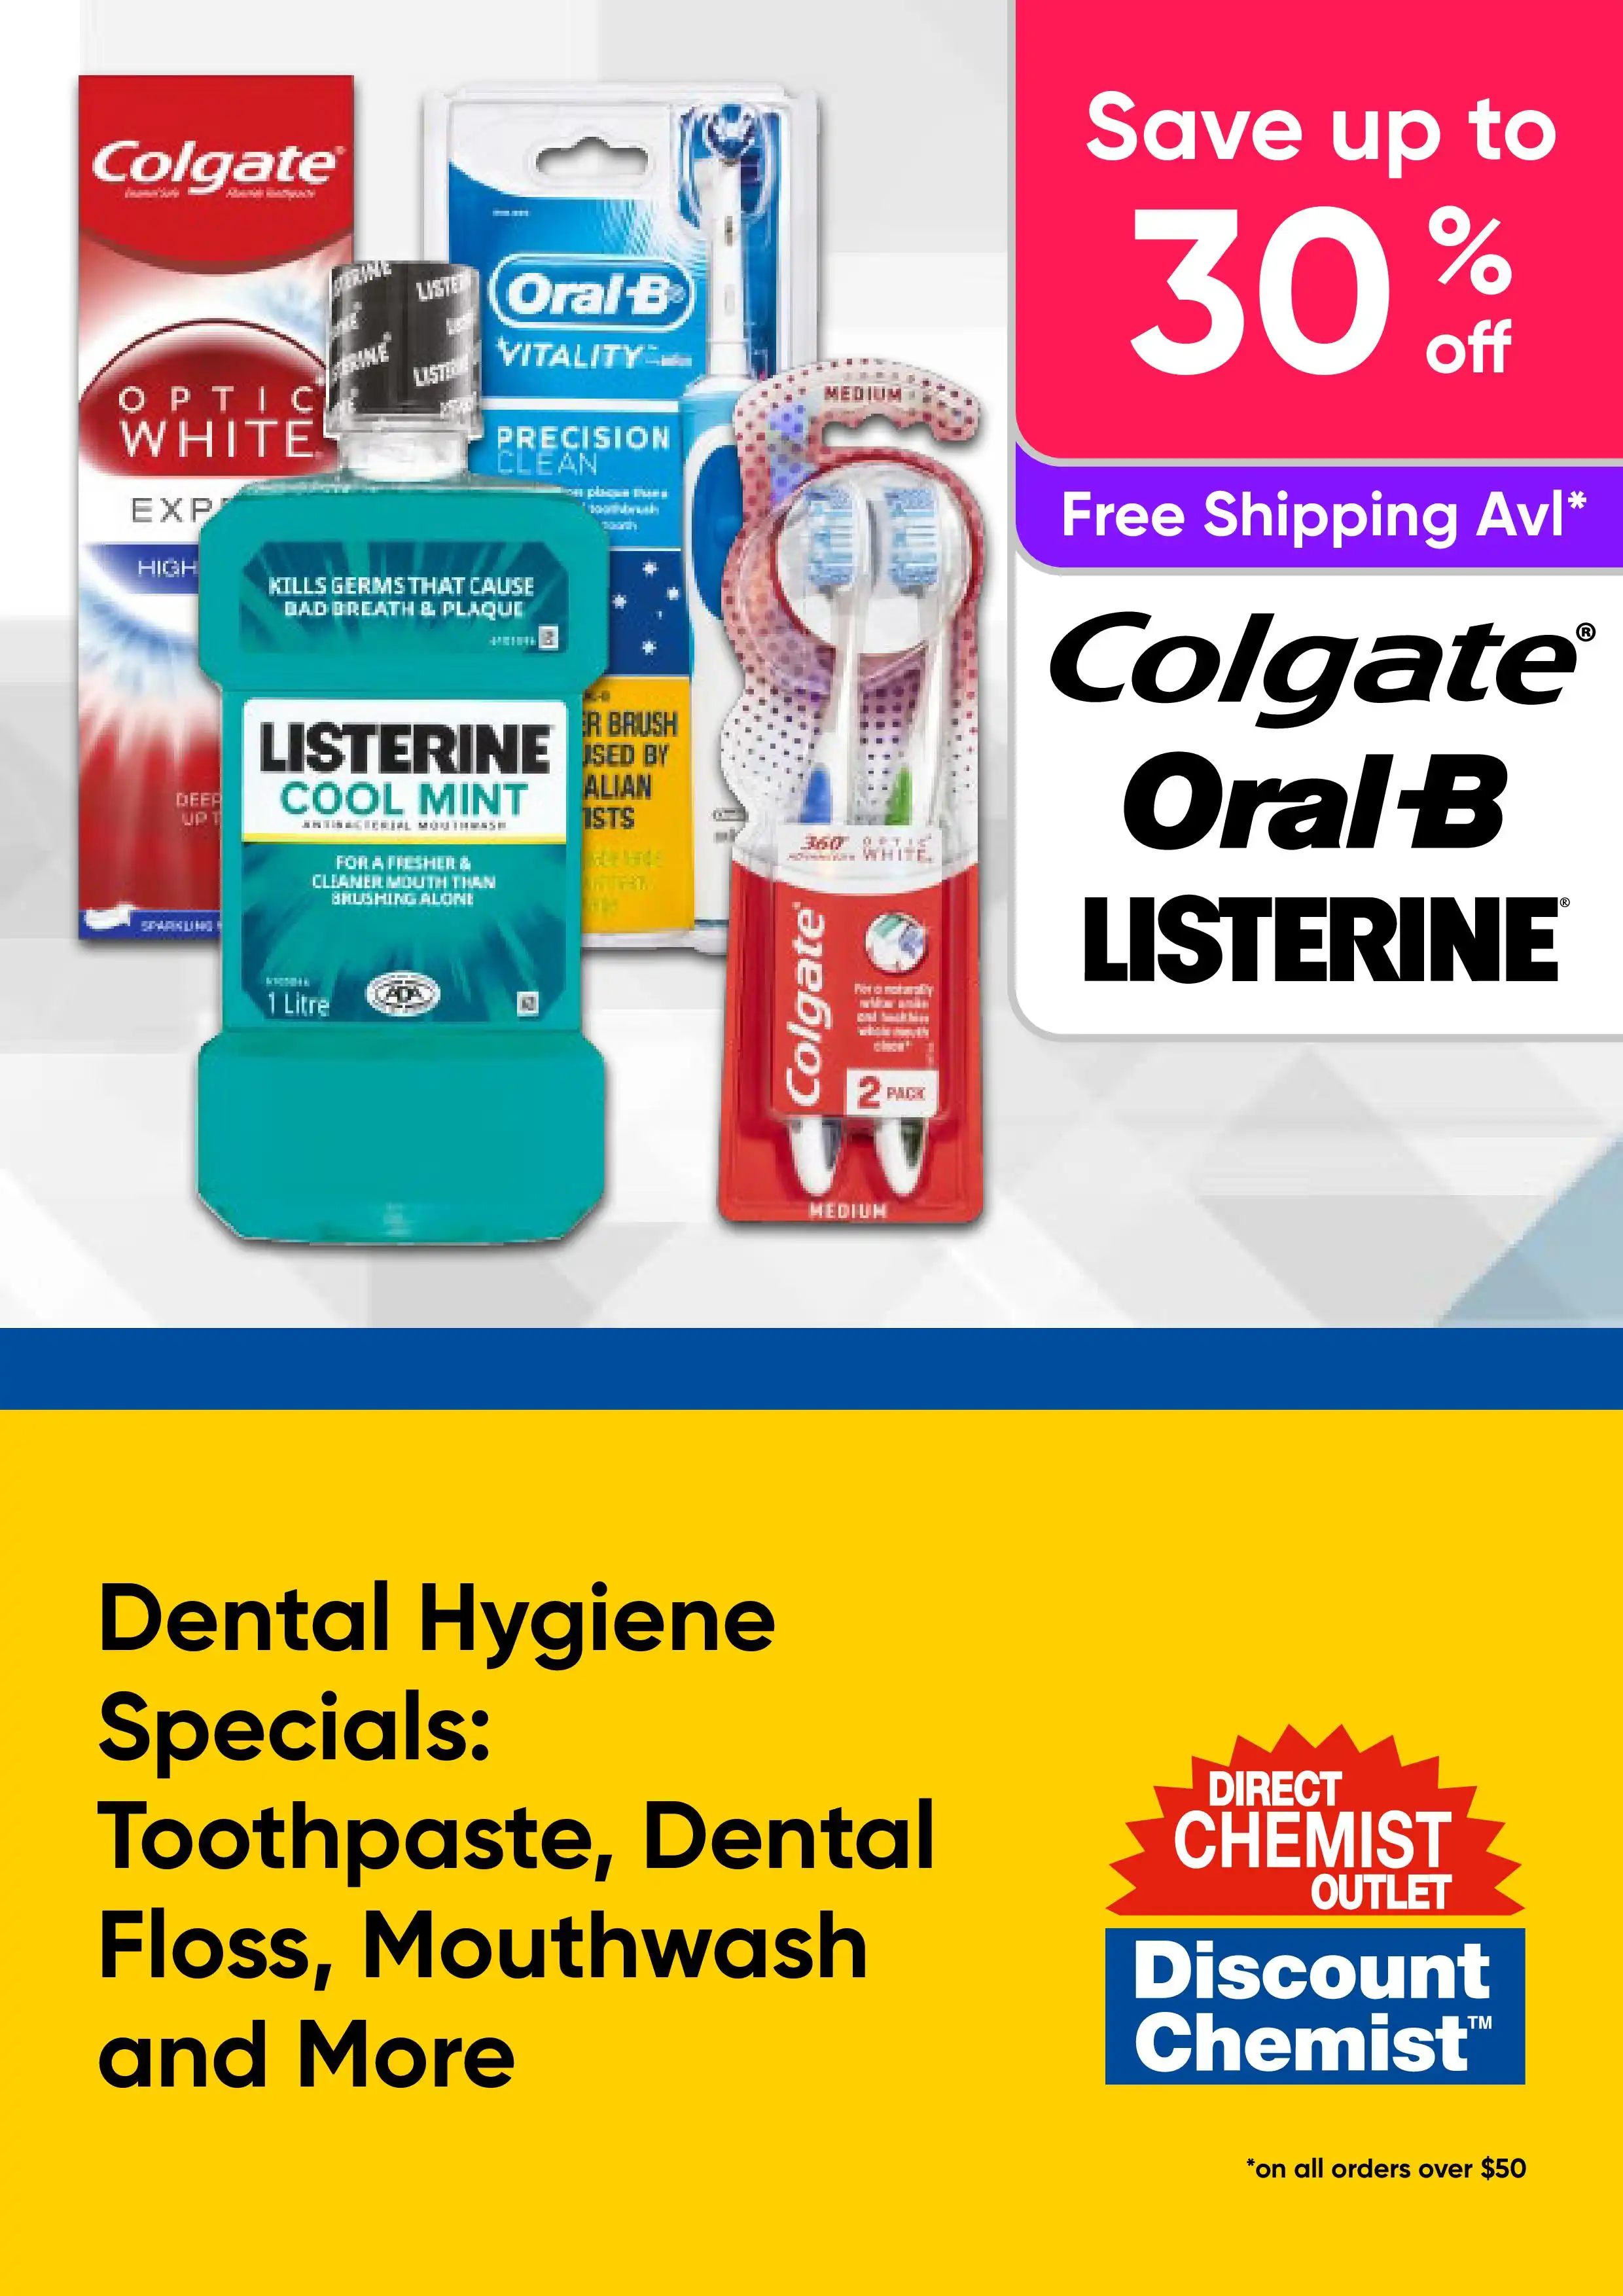 Dental Hygiene Specials - Toothpaste, Dental Floss, Mouthwash and More - Colgate, Oral B, Listerine - up to 30% off